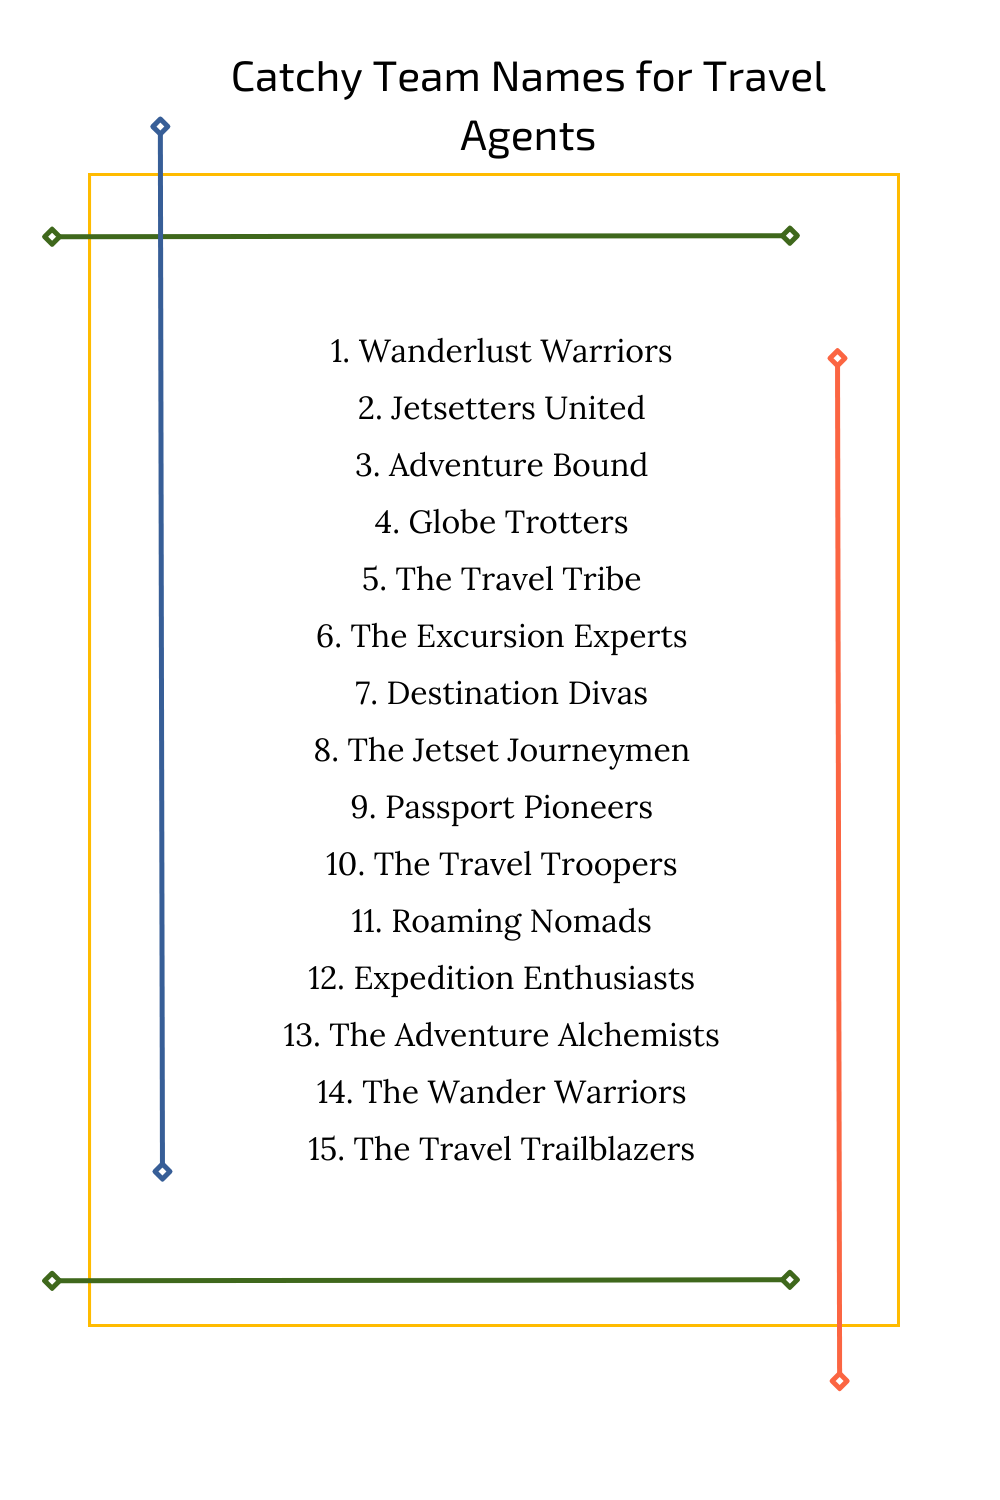 Catchy Team Names for Travel Agents